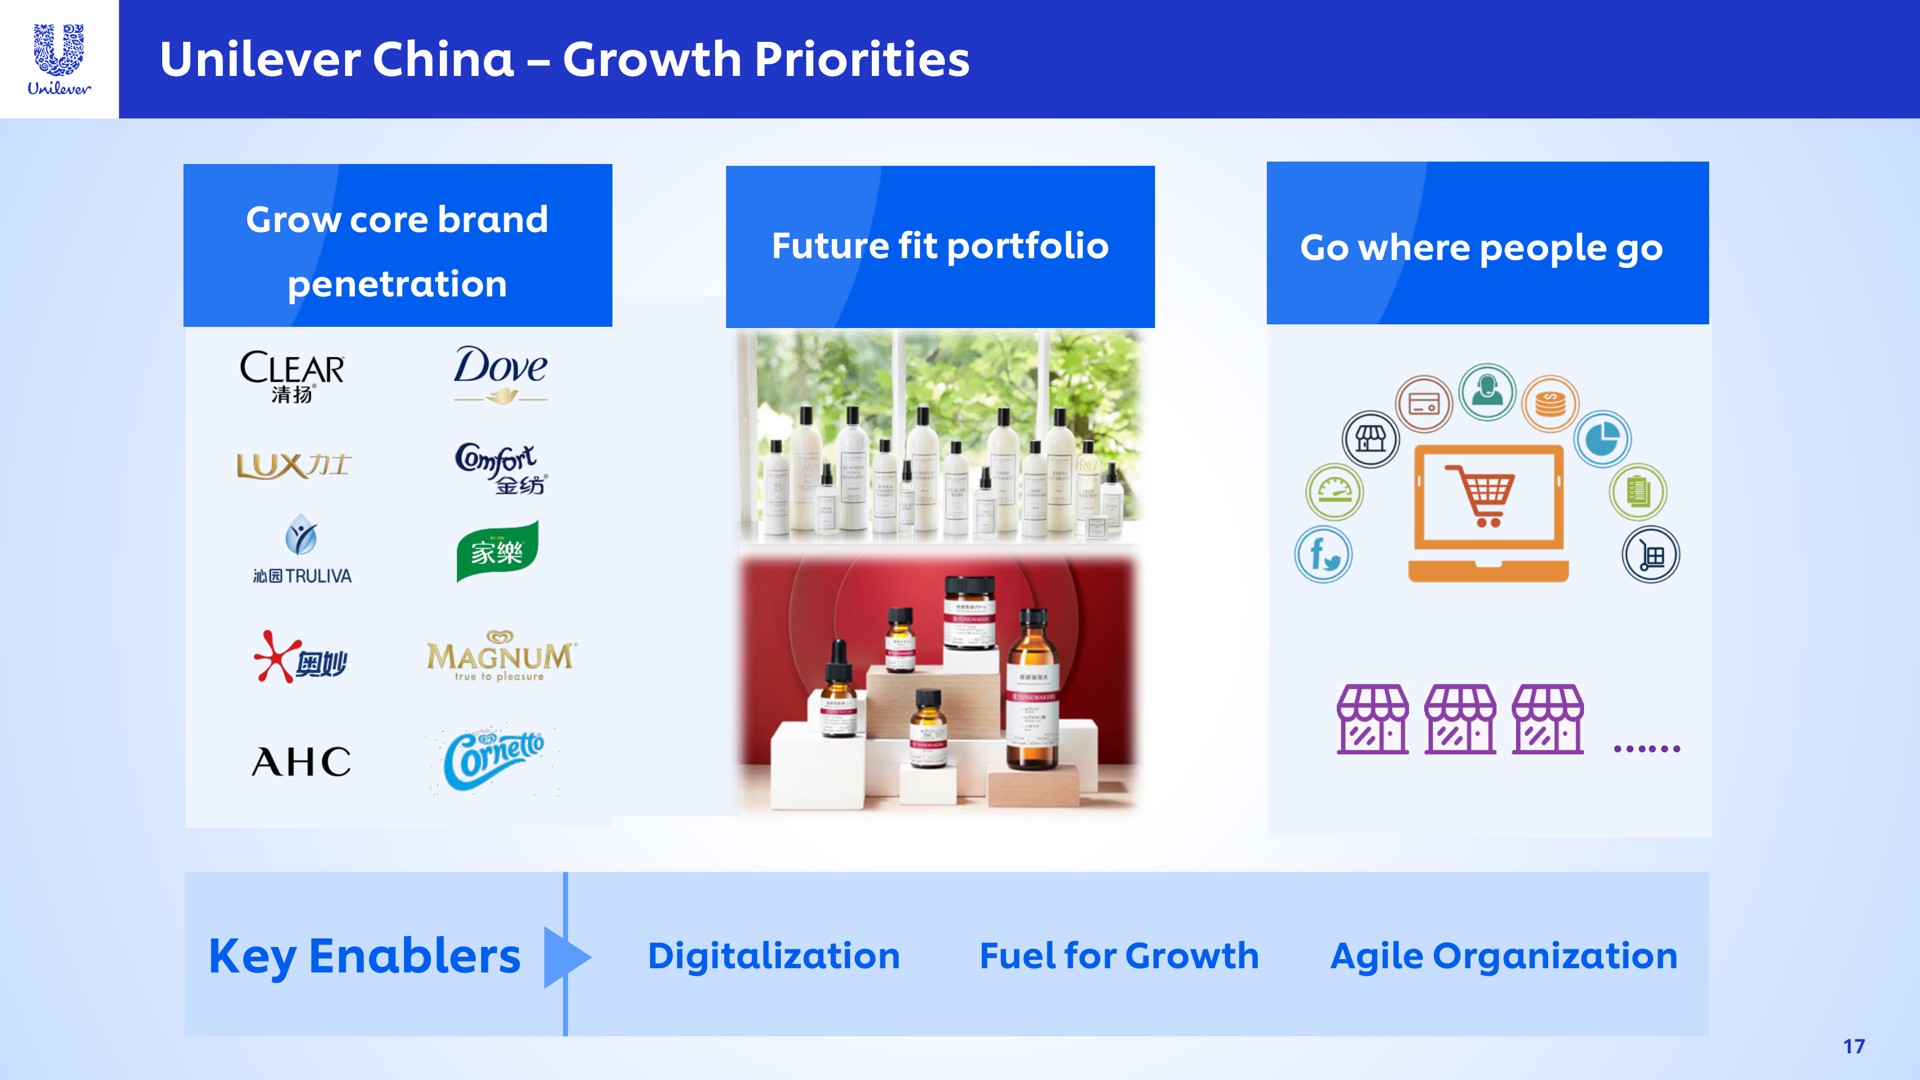 china growth priorities key clear dove a digitalization | Unilever